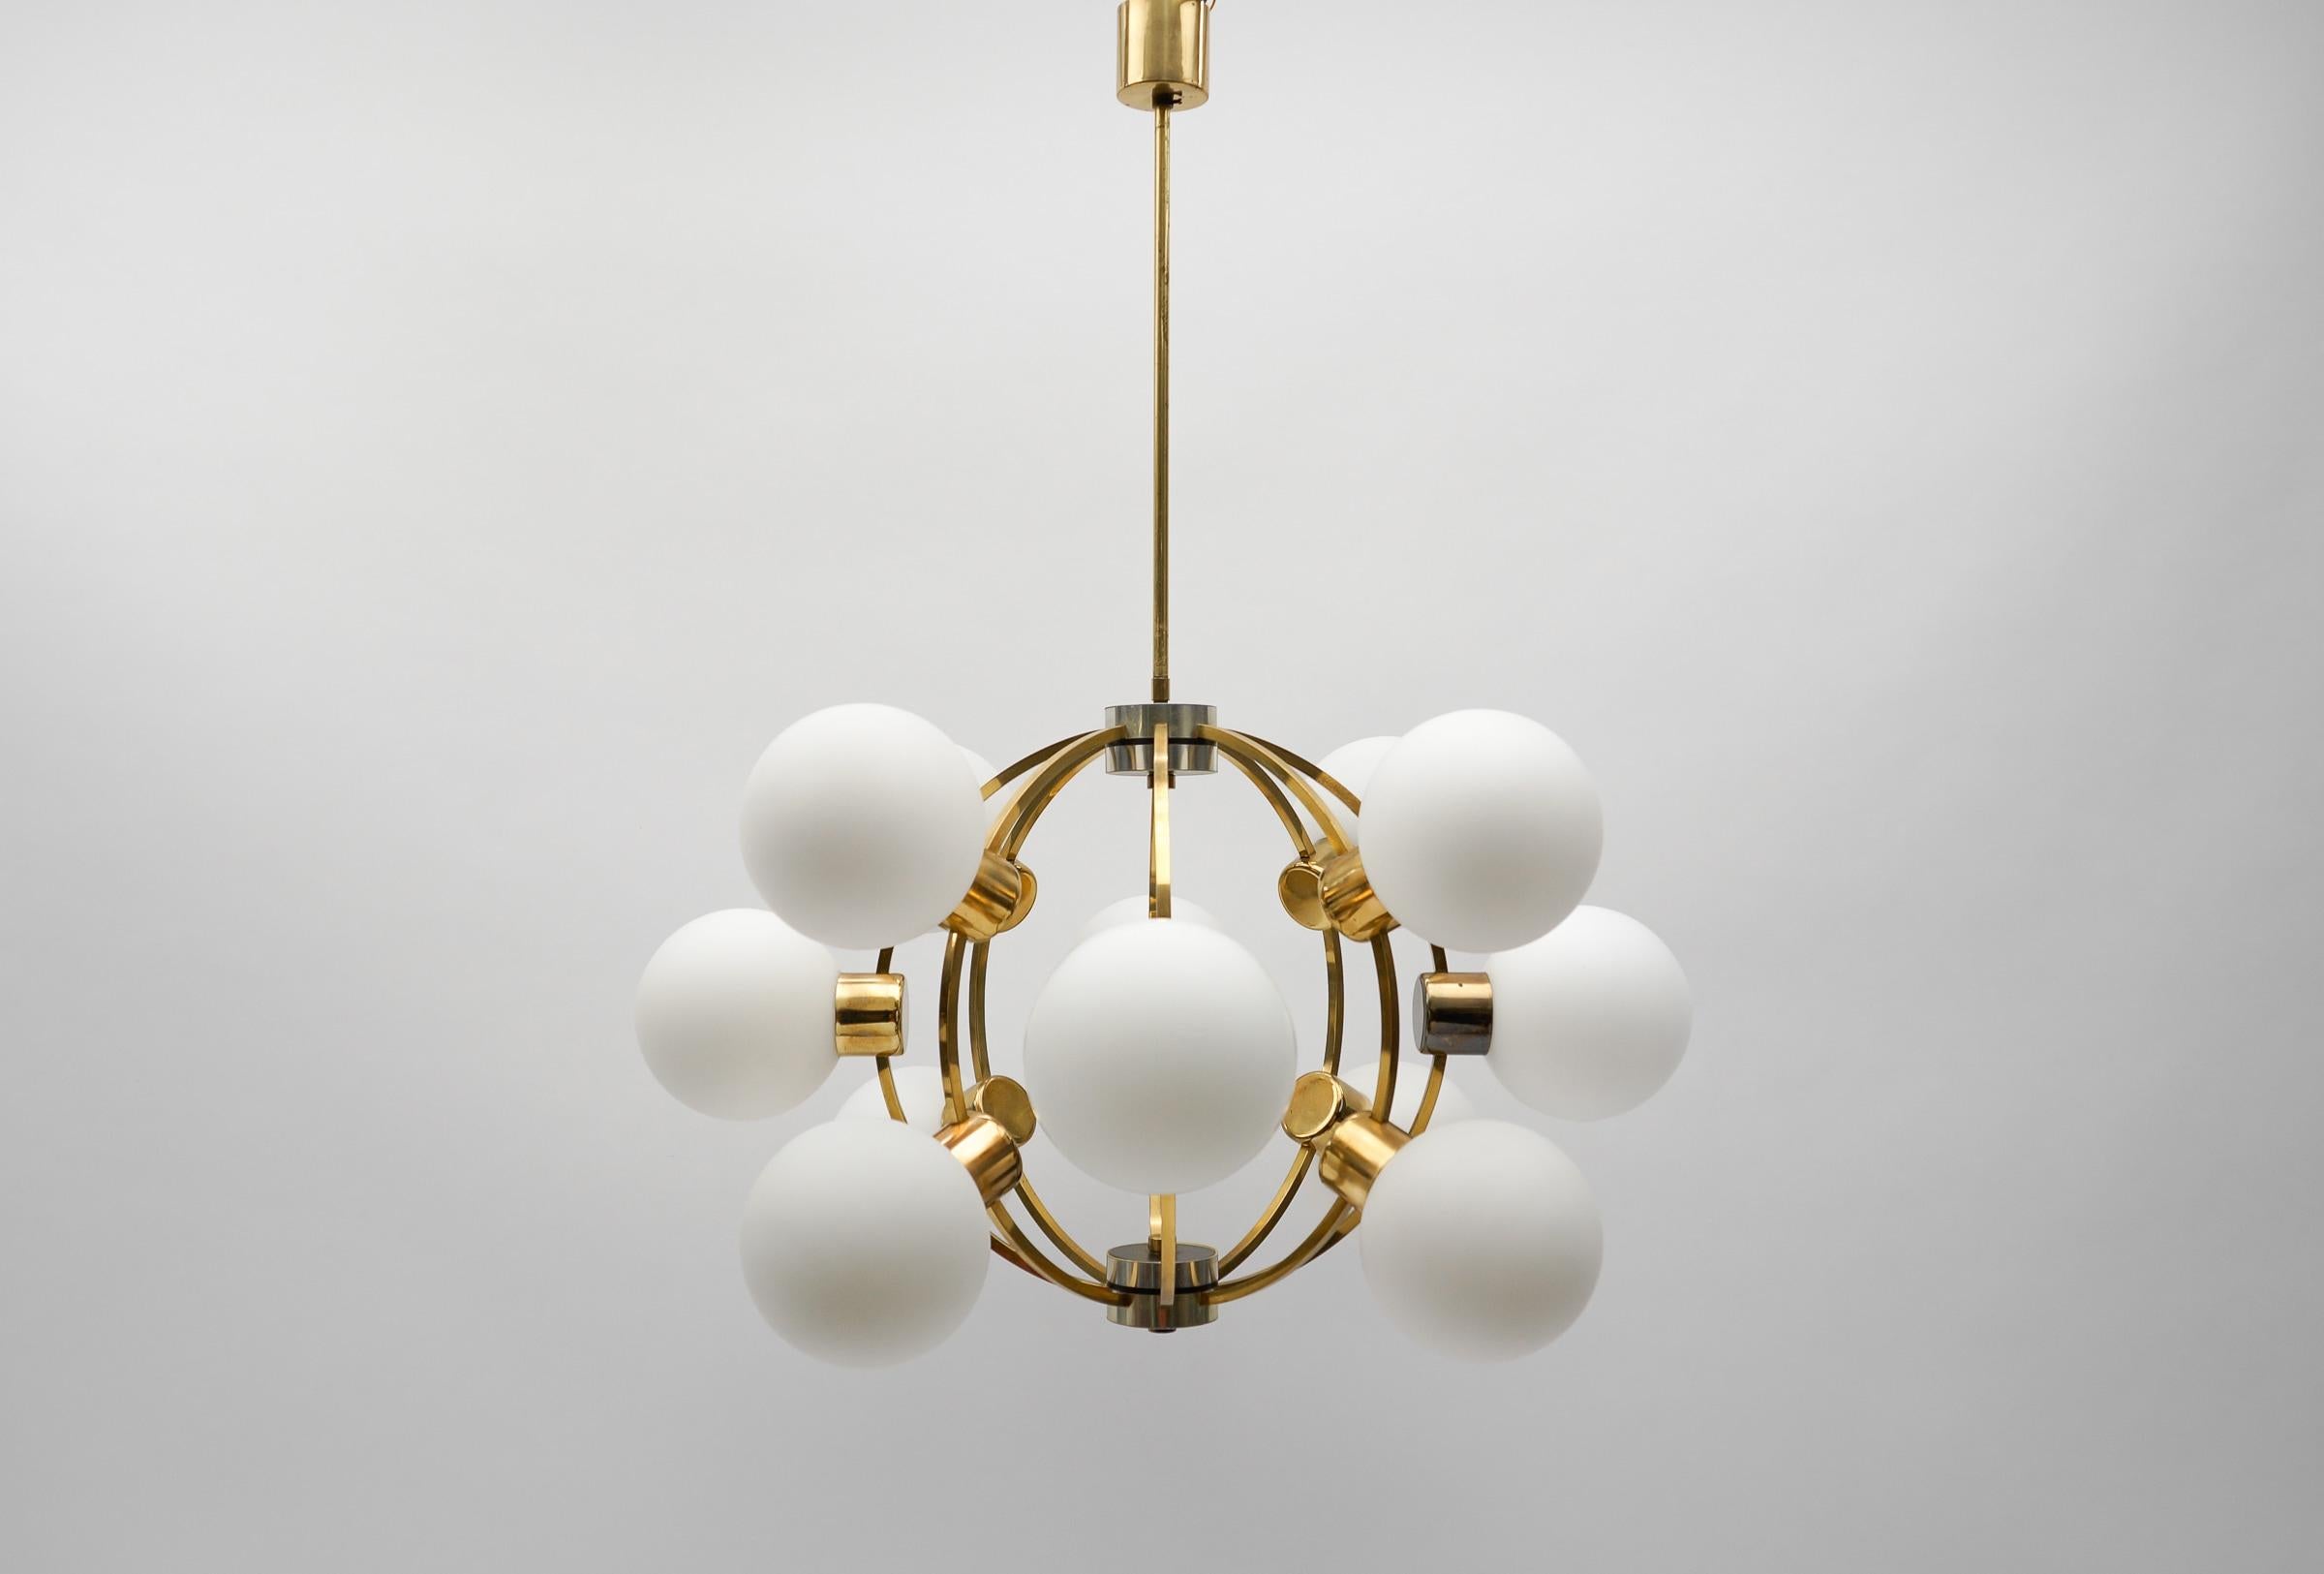 Large Mid-Century Modern Orbit or Sputnik Lamp with 12 Opaline Glass Balls

Diameter: 25.19 in (64 cm)
Height: 33.07 in (83 cm)

Executed in glass, metal and brass. The lamp needs 10 x E27 / E26 Edison screw fit bulb, is wired, in working condition